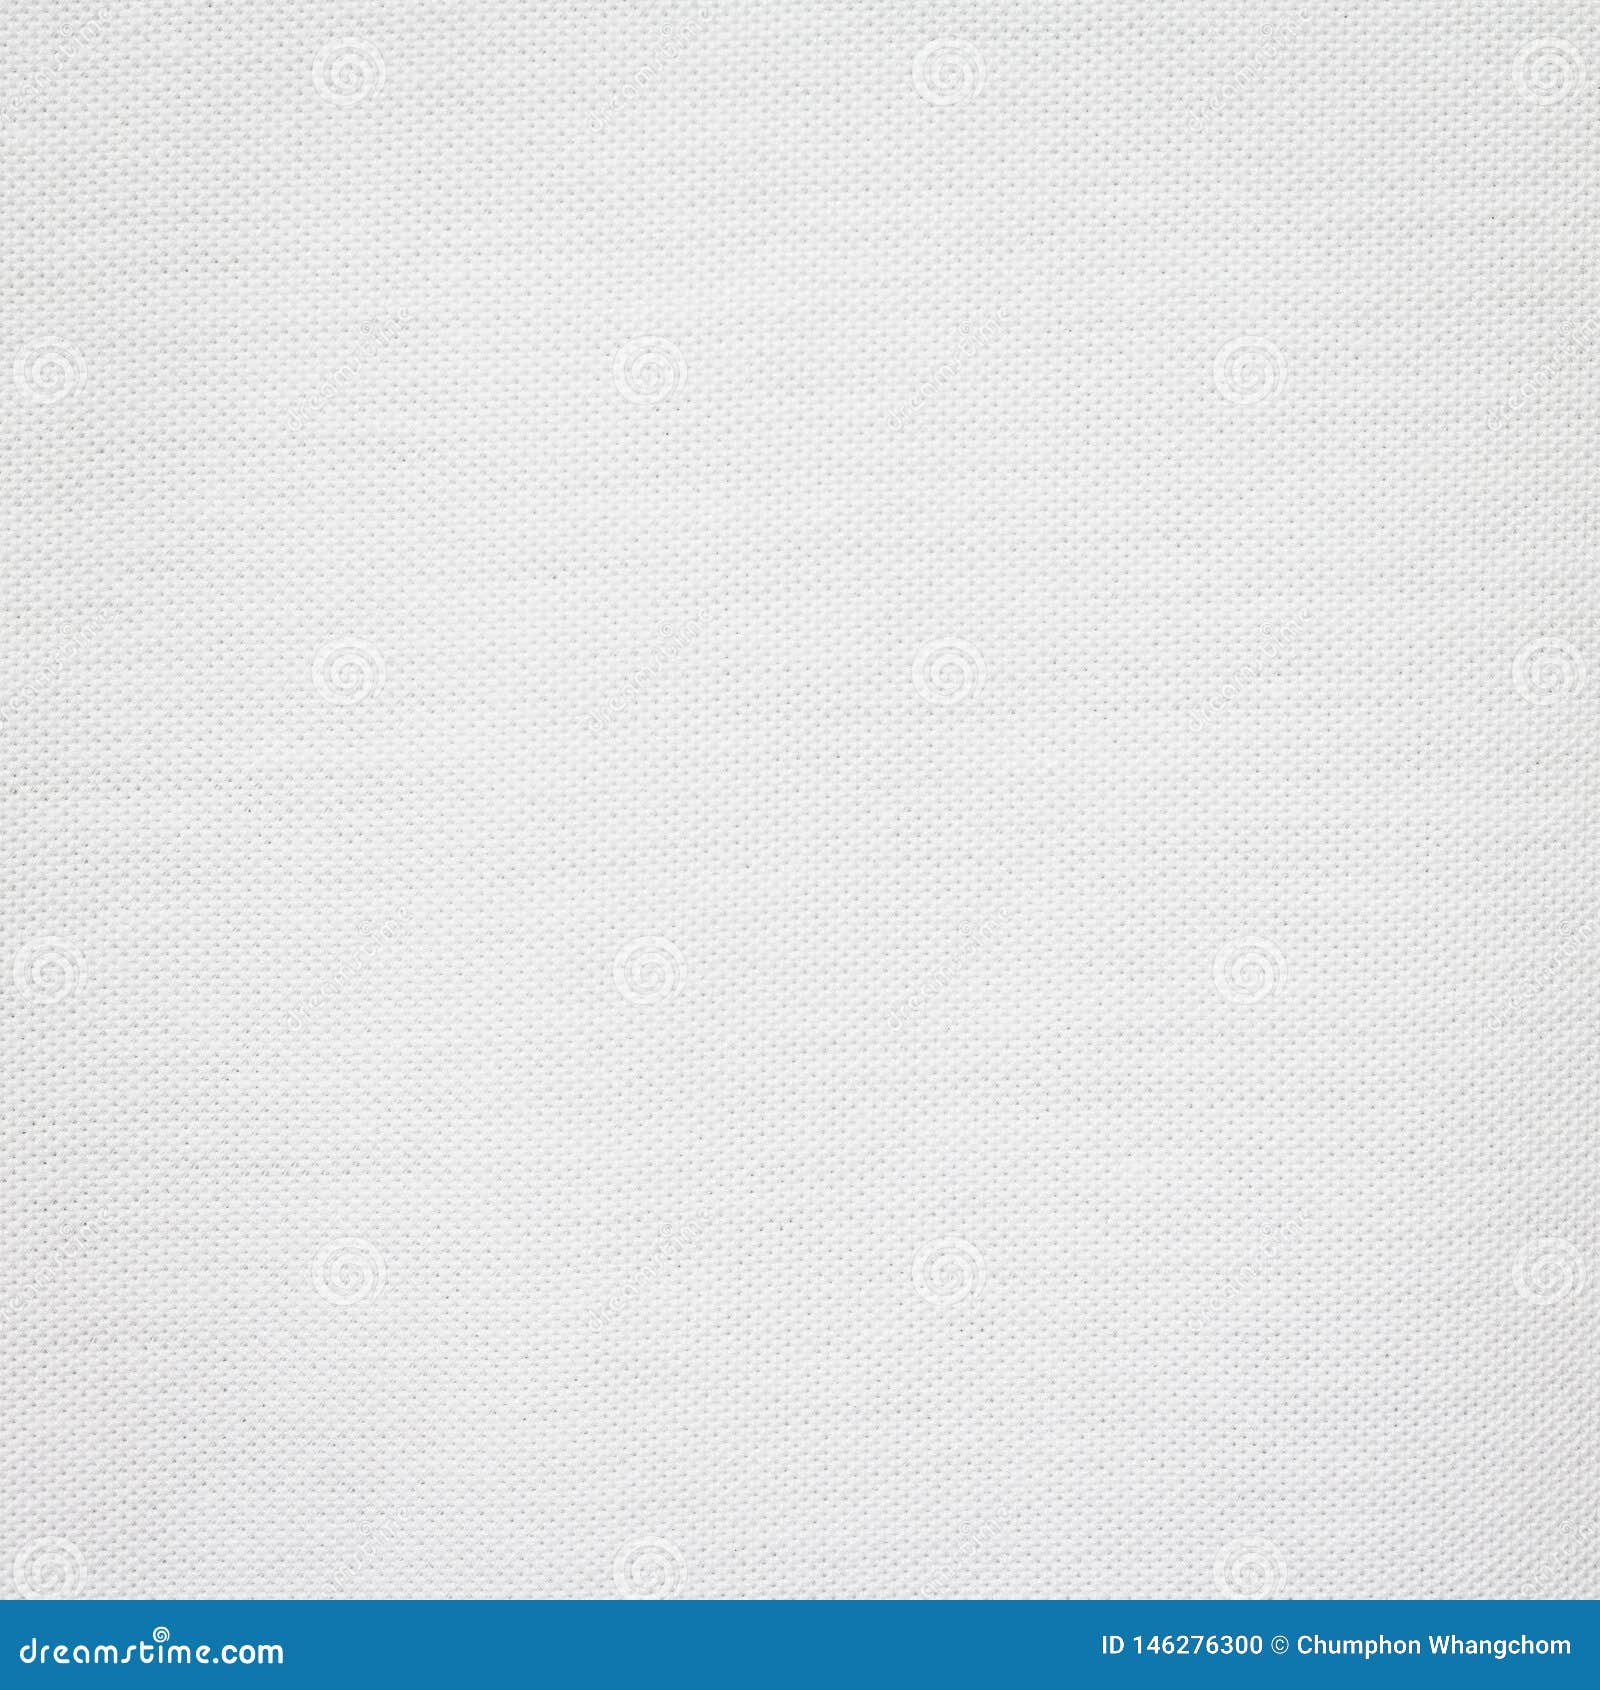 Cotton Texture Background White Fabric Material Blank Textile Surface Stock Photo Image Of Grunge Natural